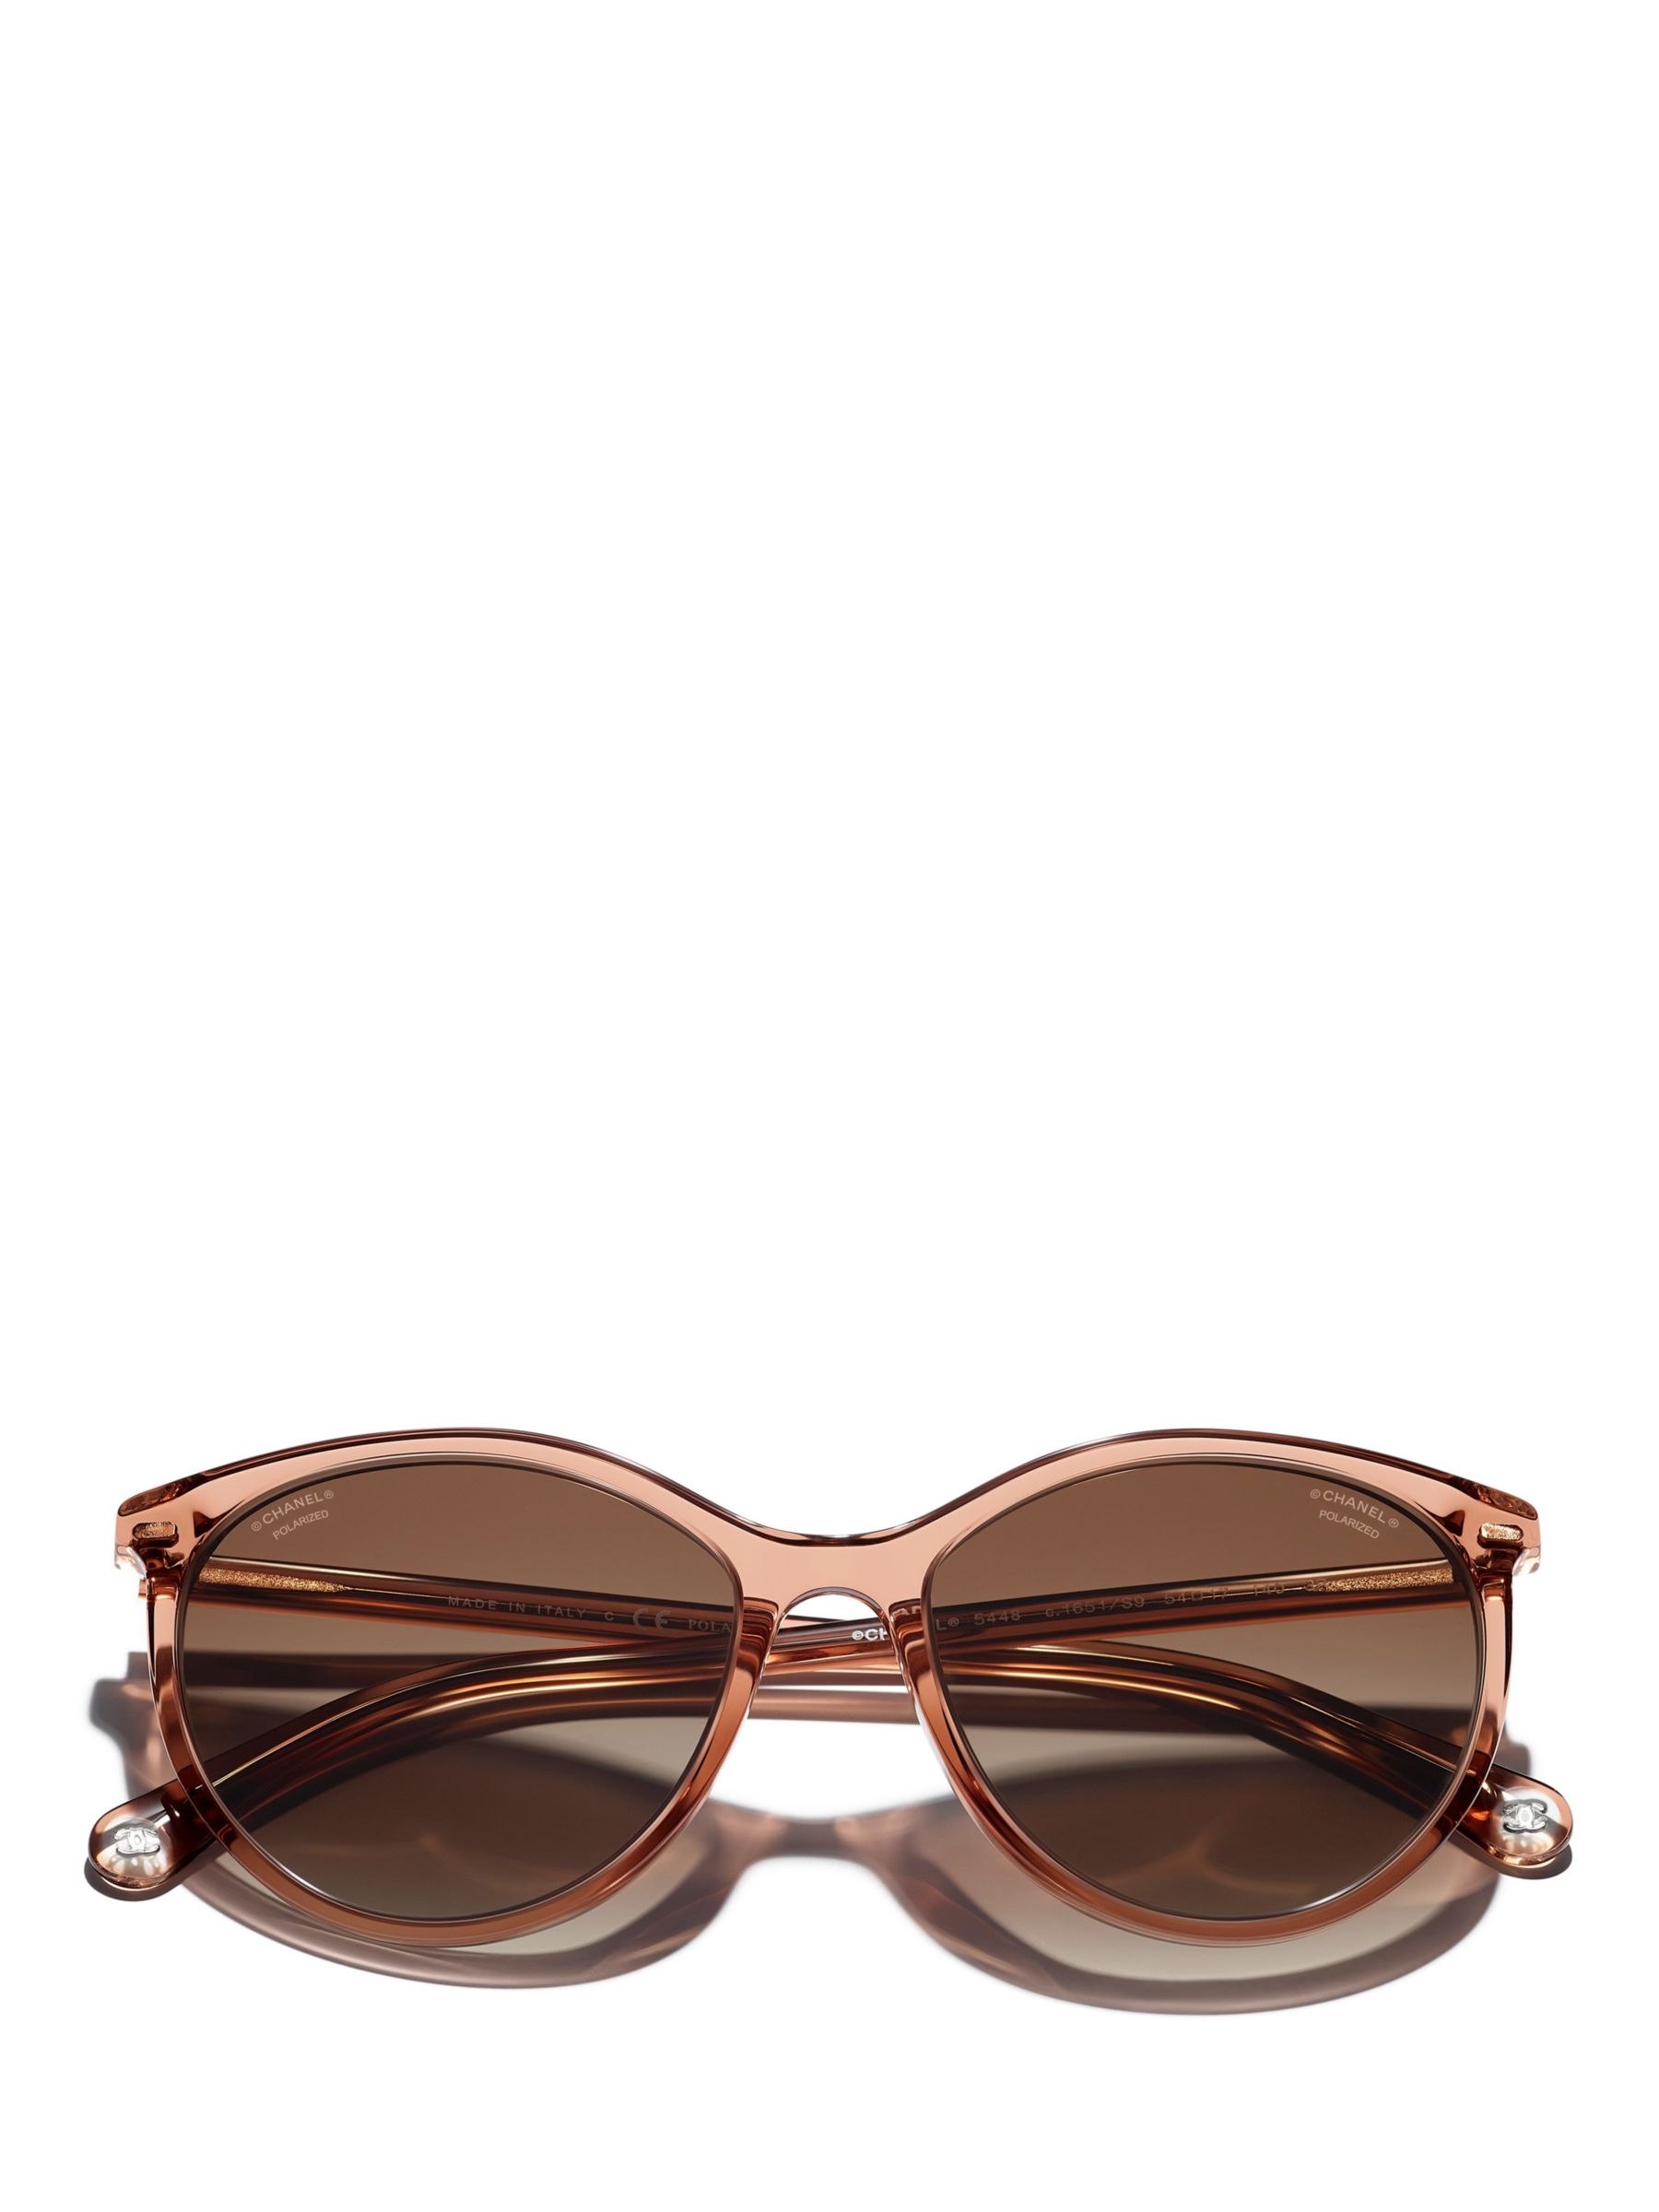 CHANEL Oval Sunglasses CH5448 Pink/Brown Gradient at John Lewis & Partners